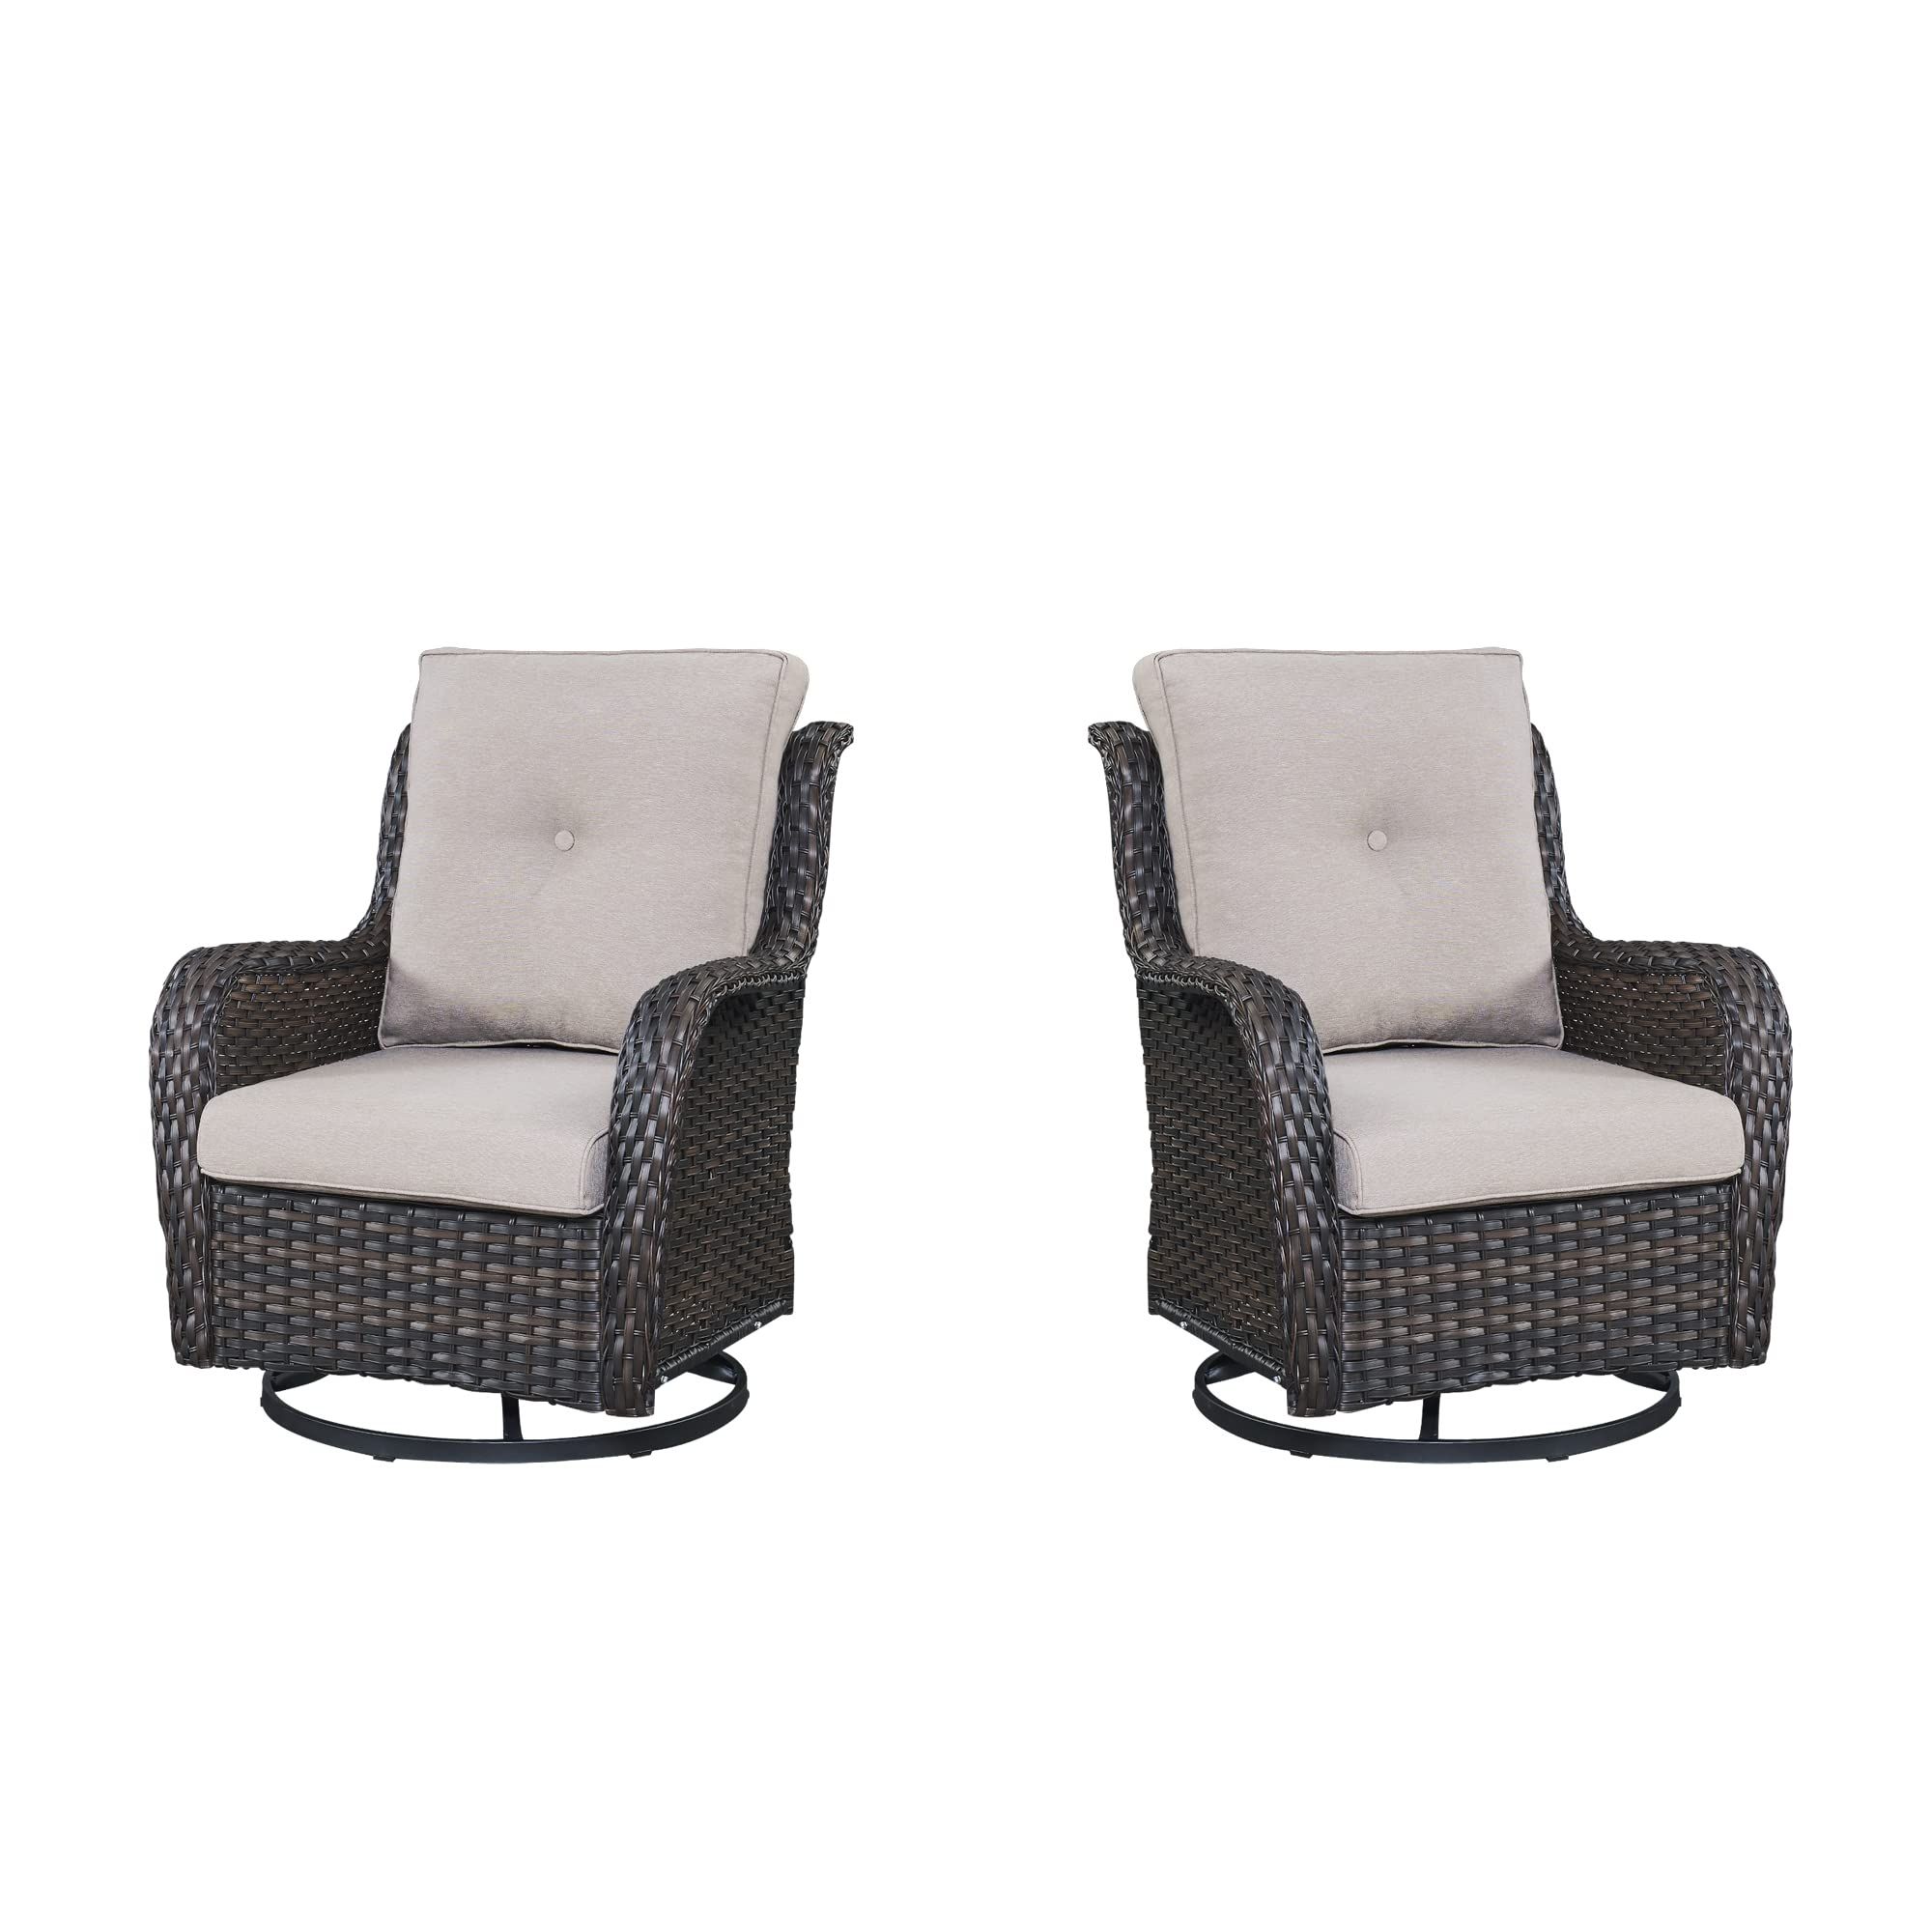 2 Piece Swivel Gliders With Patio Cover Pertaining To 2017 Amazon: Belord Outdoor Swivel Rcoker Patio Chairs – Outdoor Swivel Patio  Chairs Set Of 2 Wicker Chair Patio Furniture Sets With Covered Cushion For  Porch Deck Balcony Garden, Beige : Patio, Lawn (View 15 of 15)